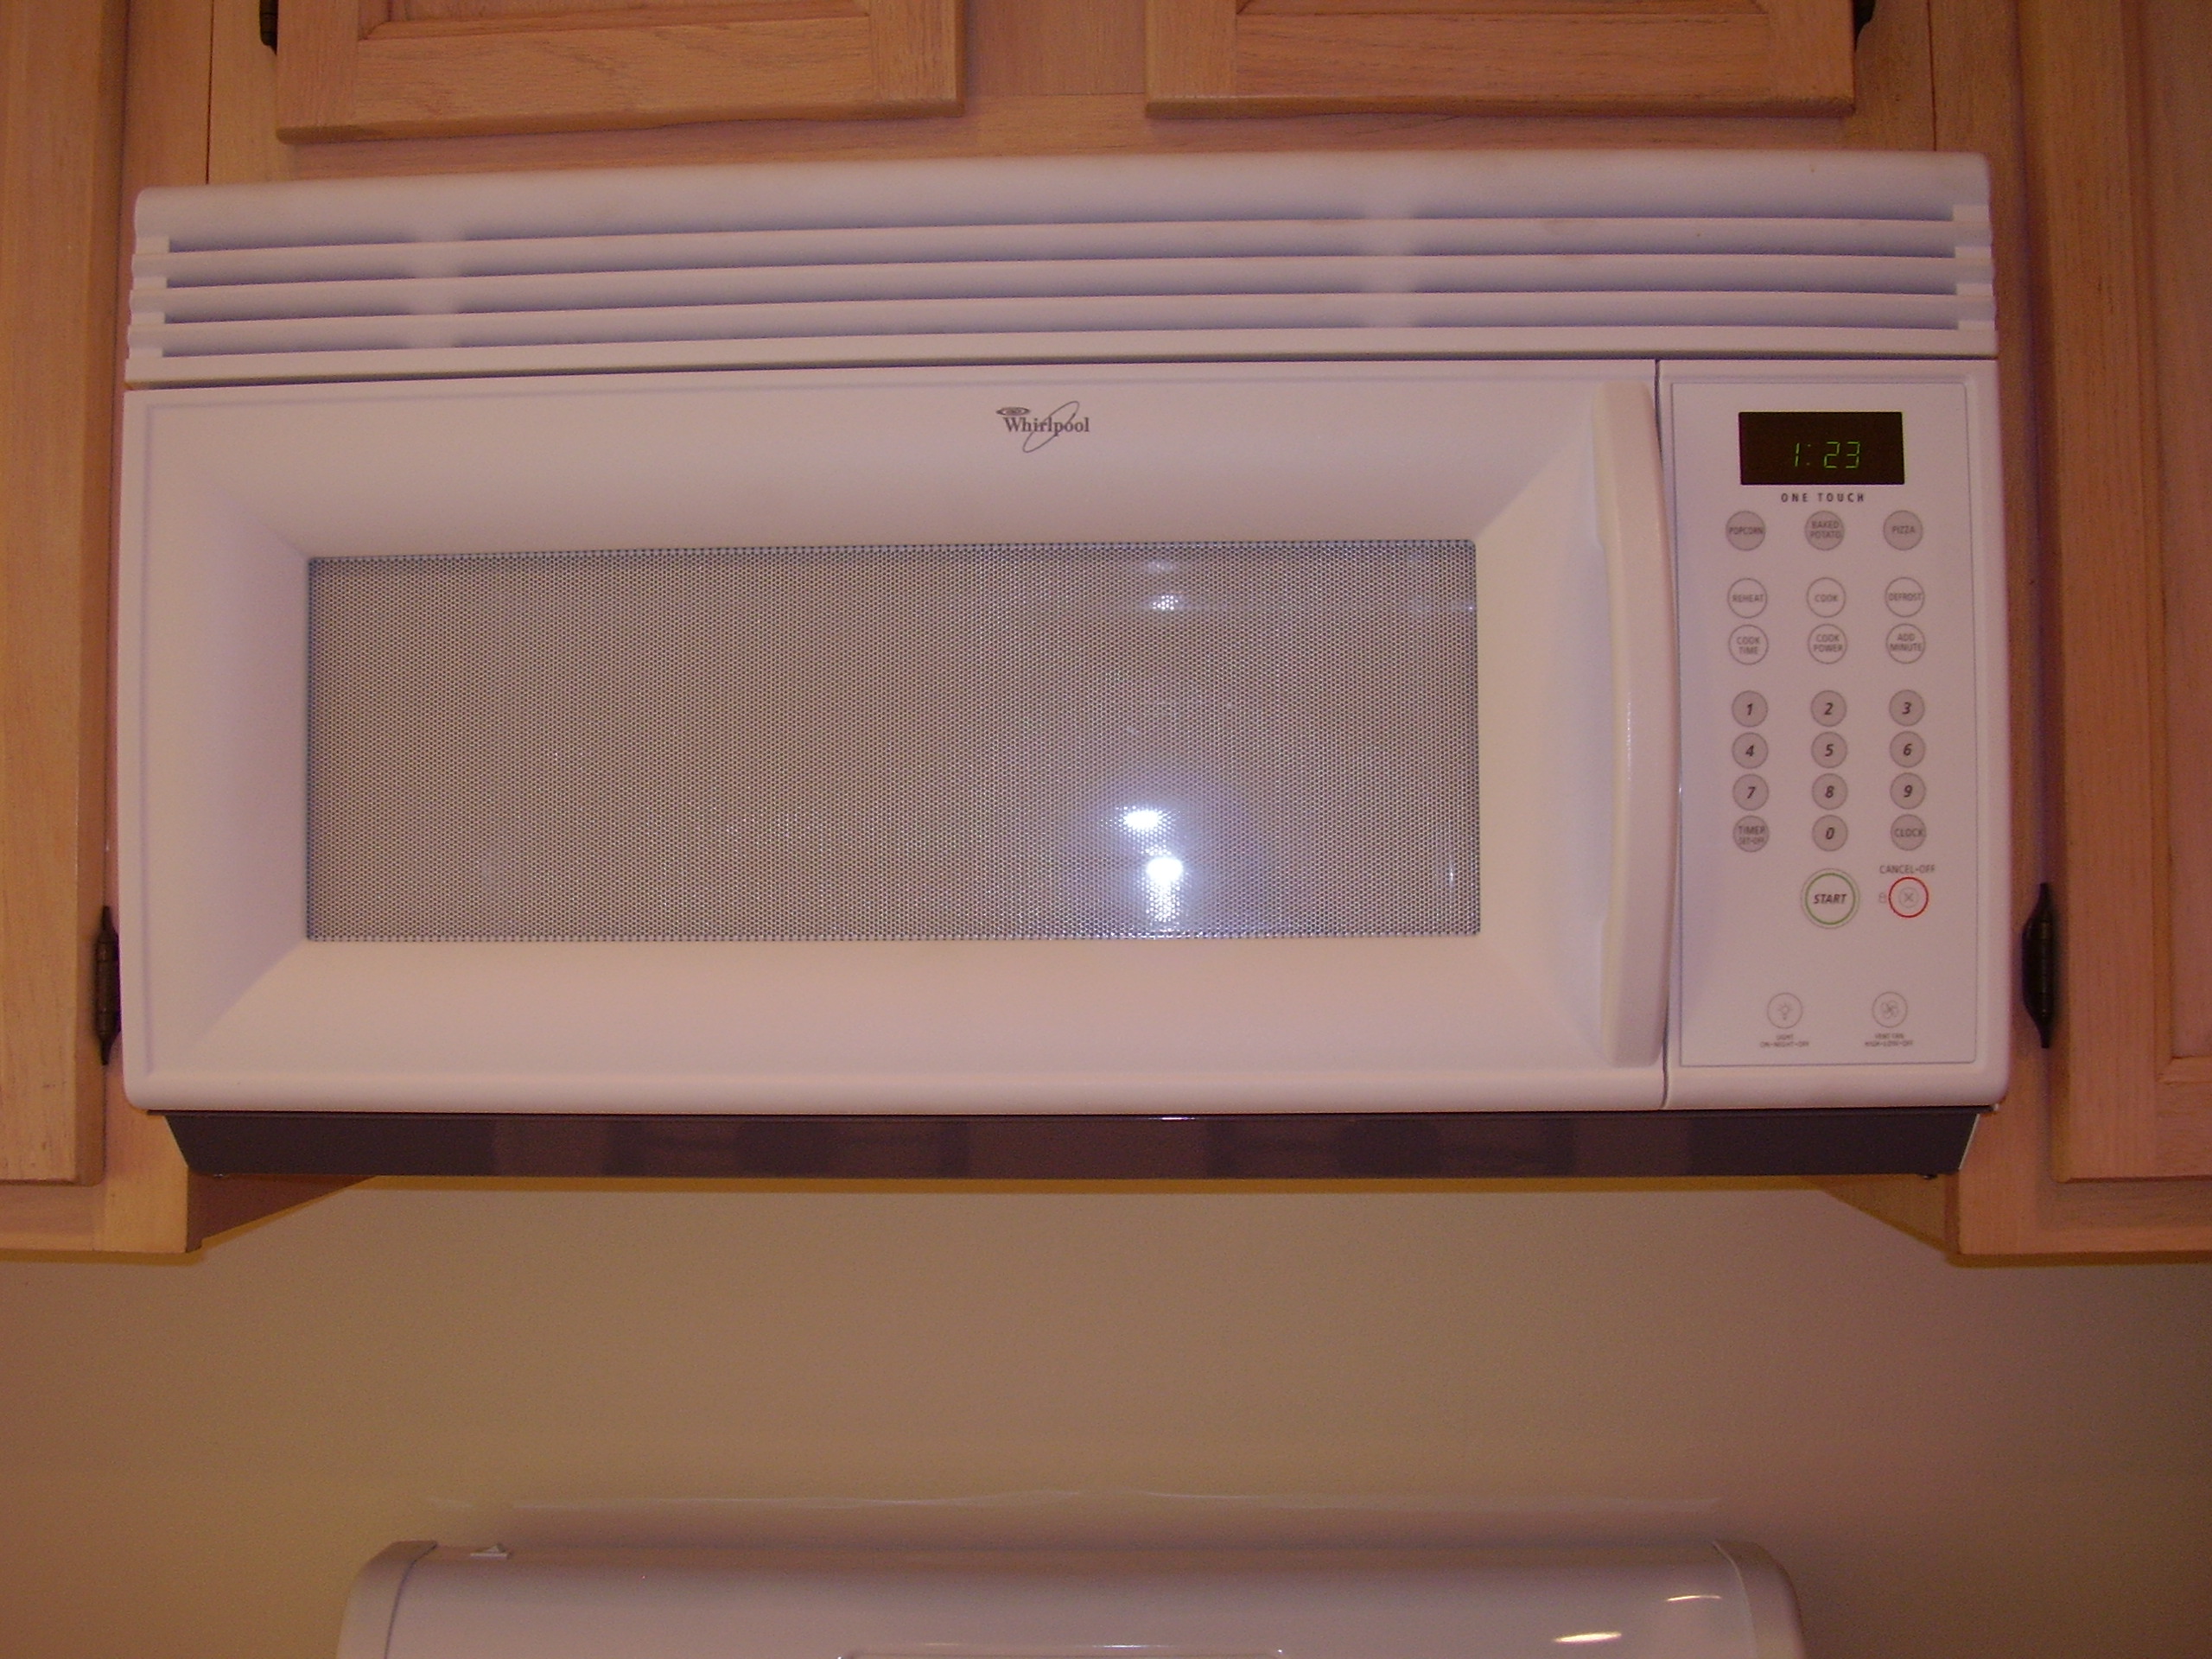 Whirlpool One Touch (over stove) Microwave in warden's Garage Sale